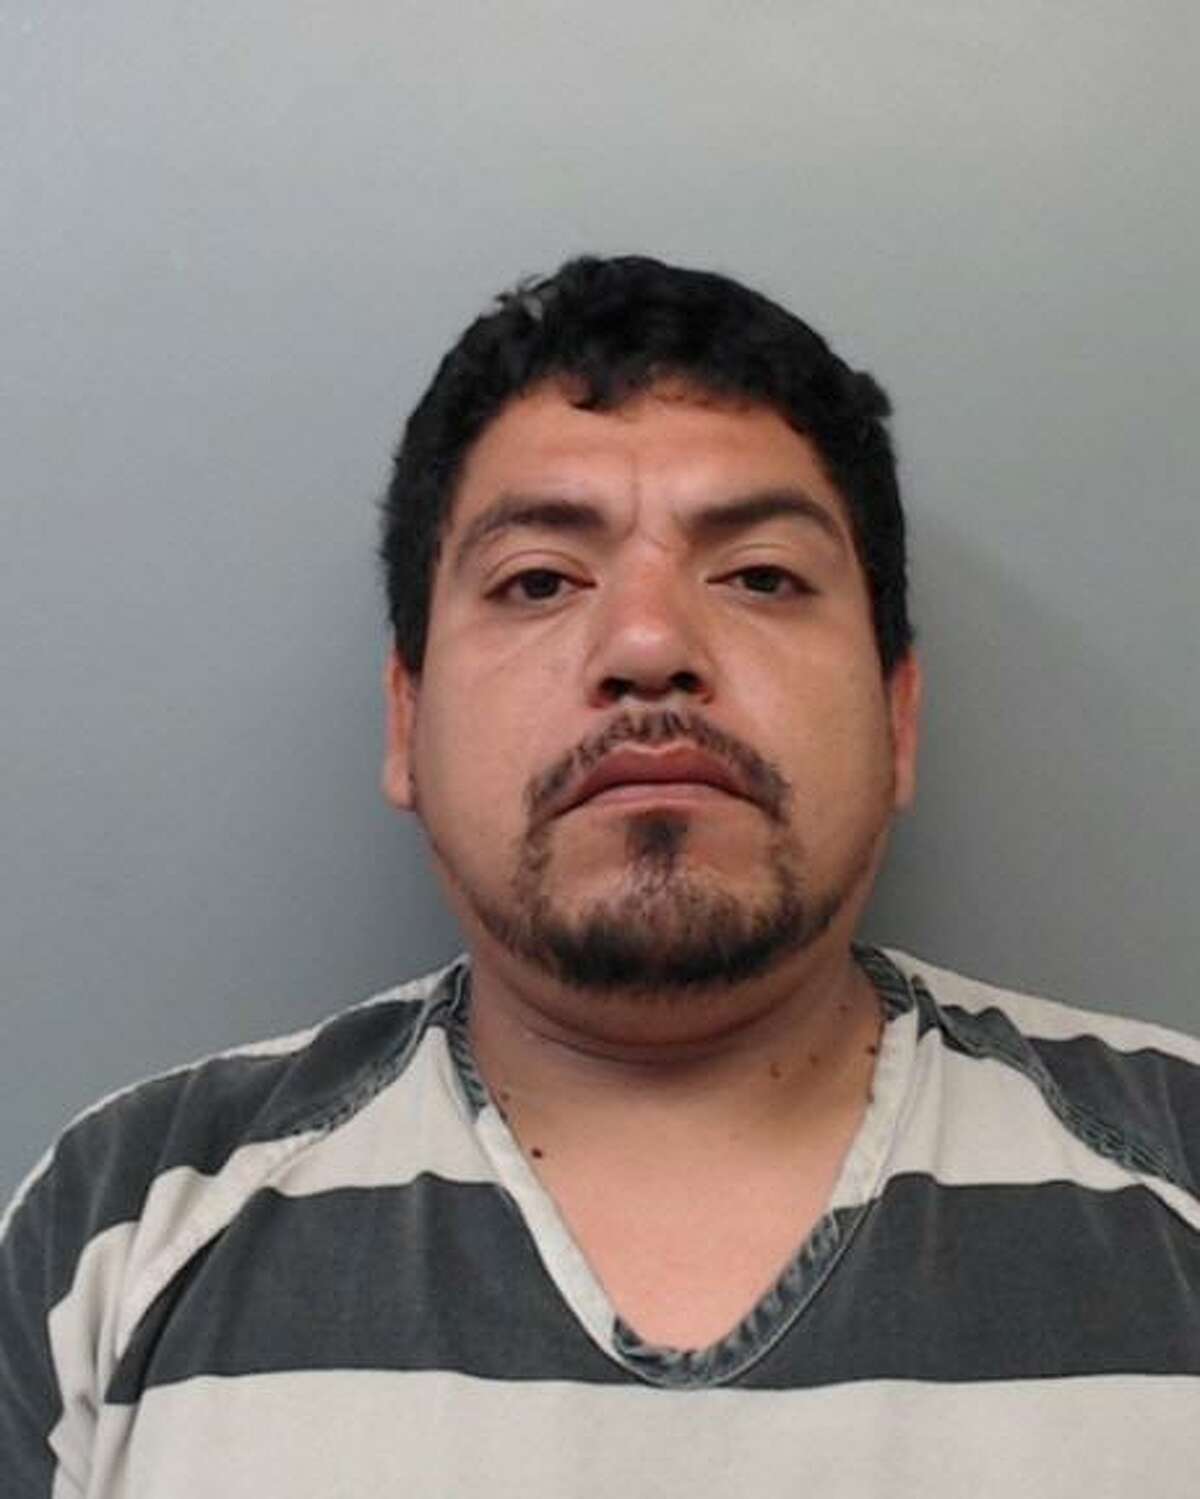 Raymundo Alvarado, 39, was charged with aggravated robbery with a firearm